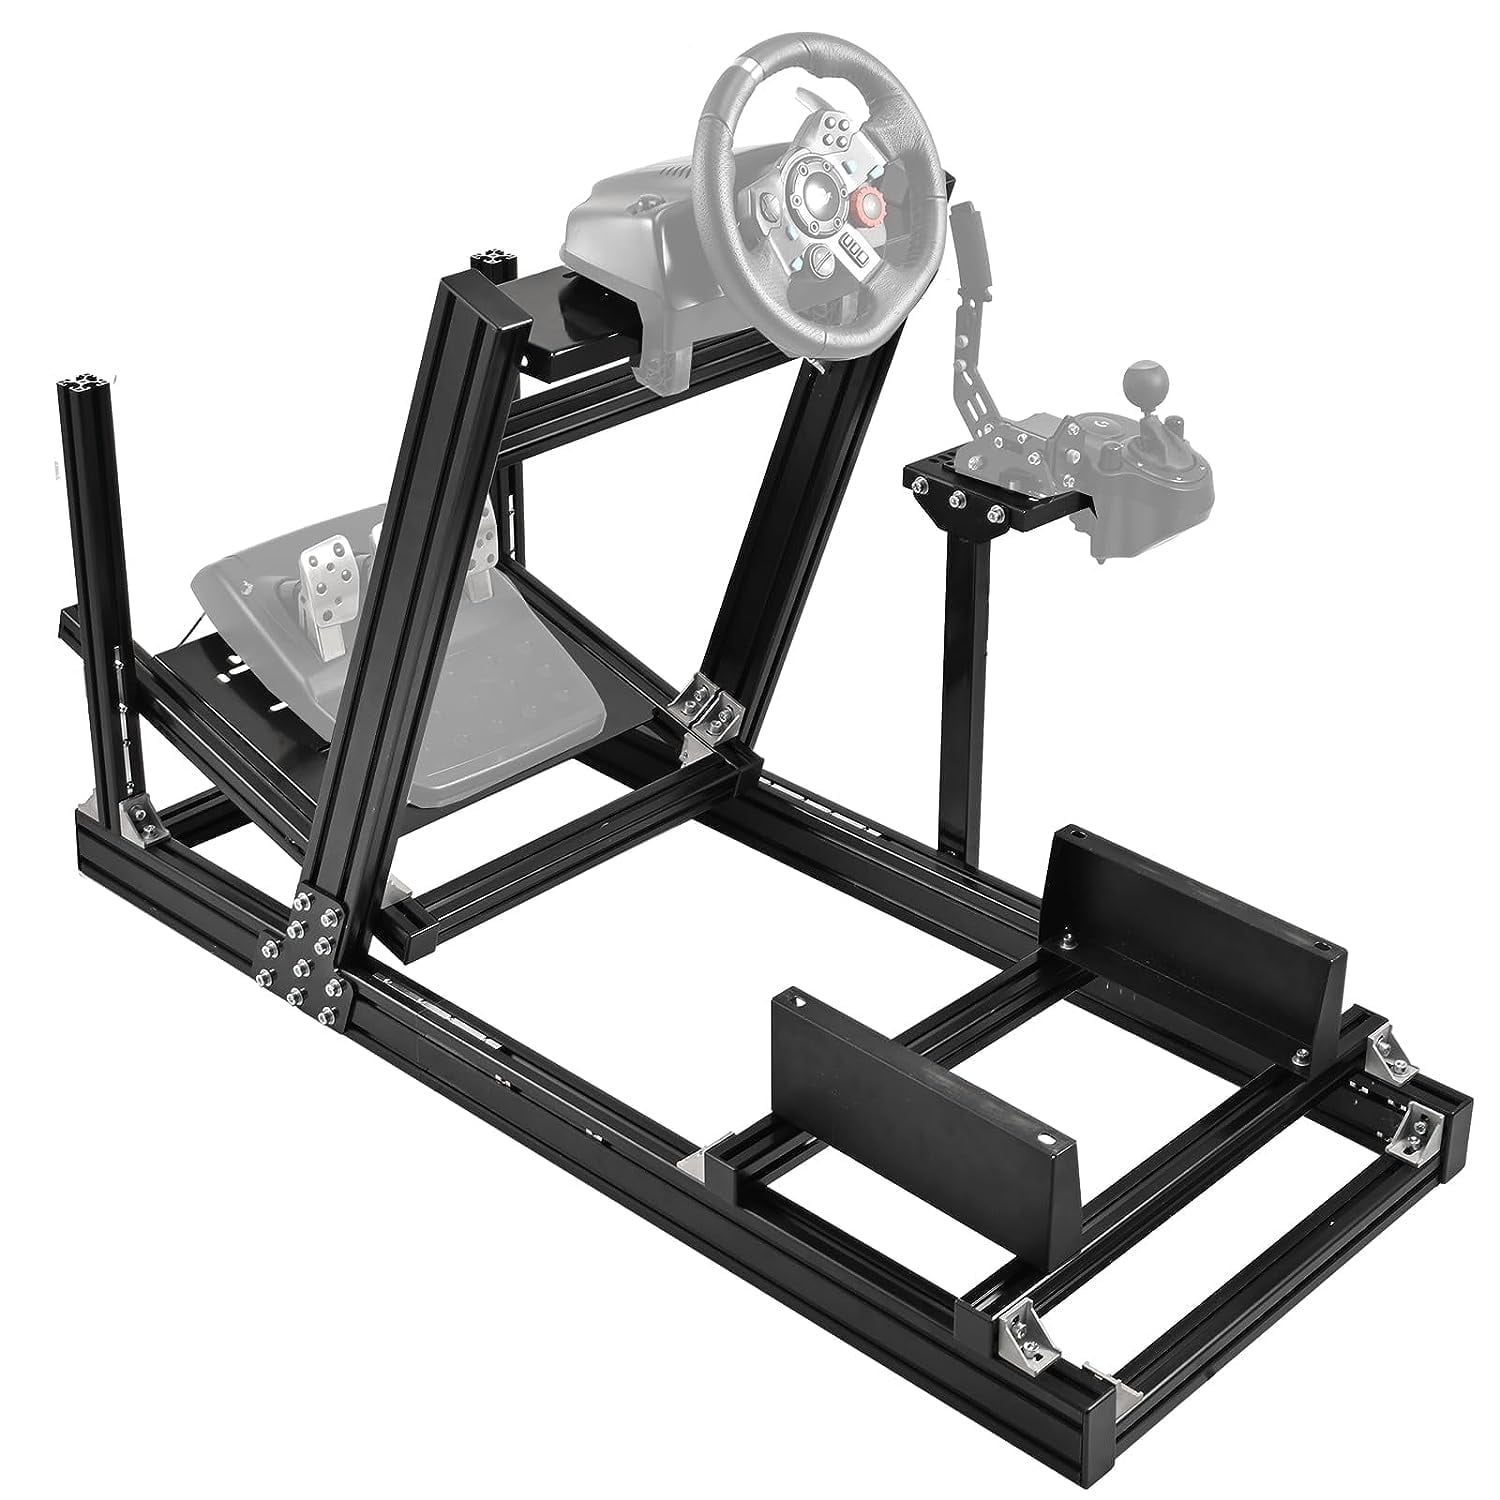 F1 Racing Simulaor Cockpit Aluminum Profile Truck Simulator with Red  Seat&Monitor Frame Fit for Logitech/Thrustmaster/Fanatec G920,G923&T80